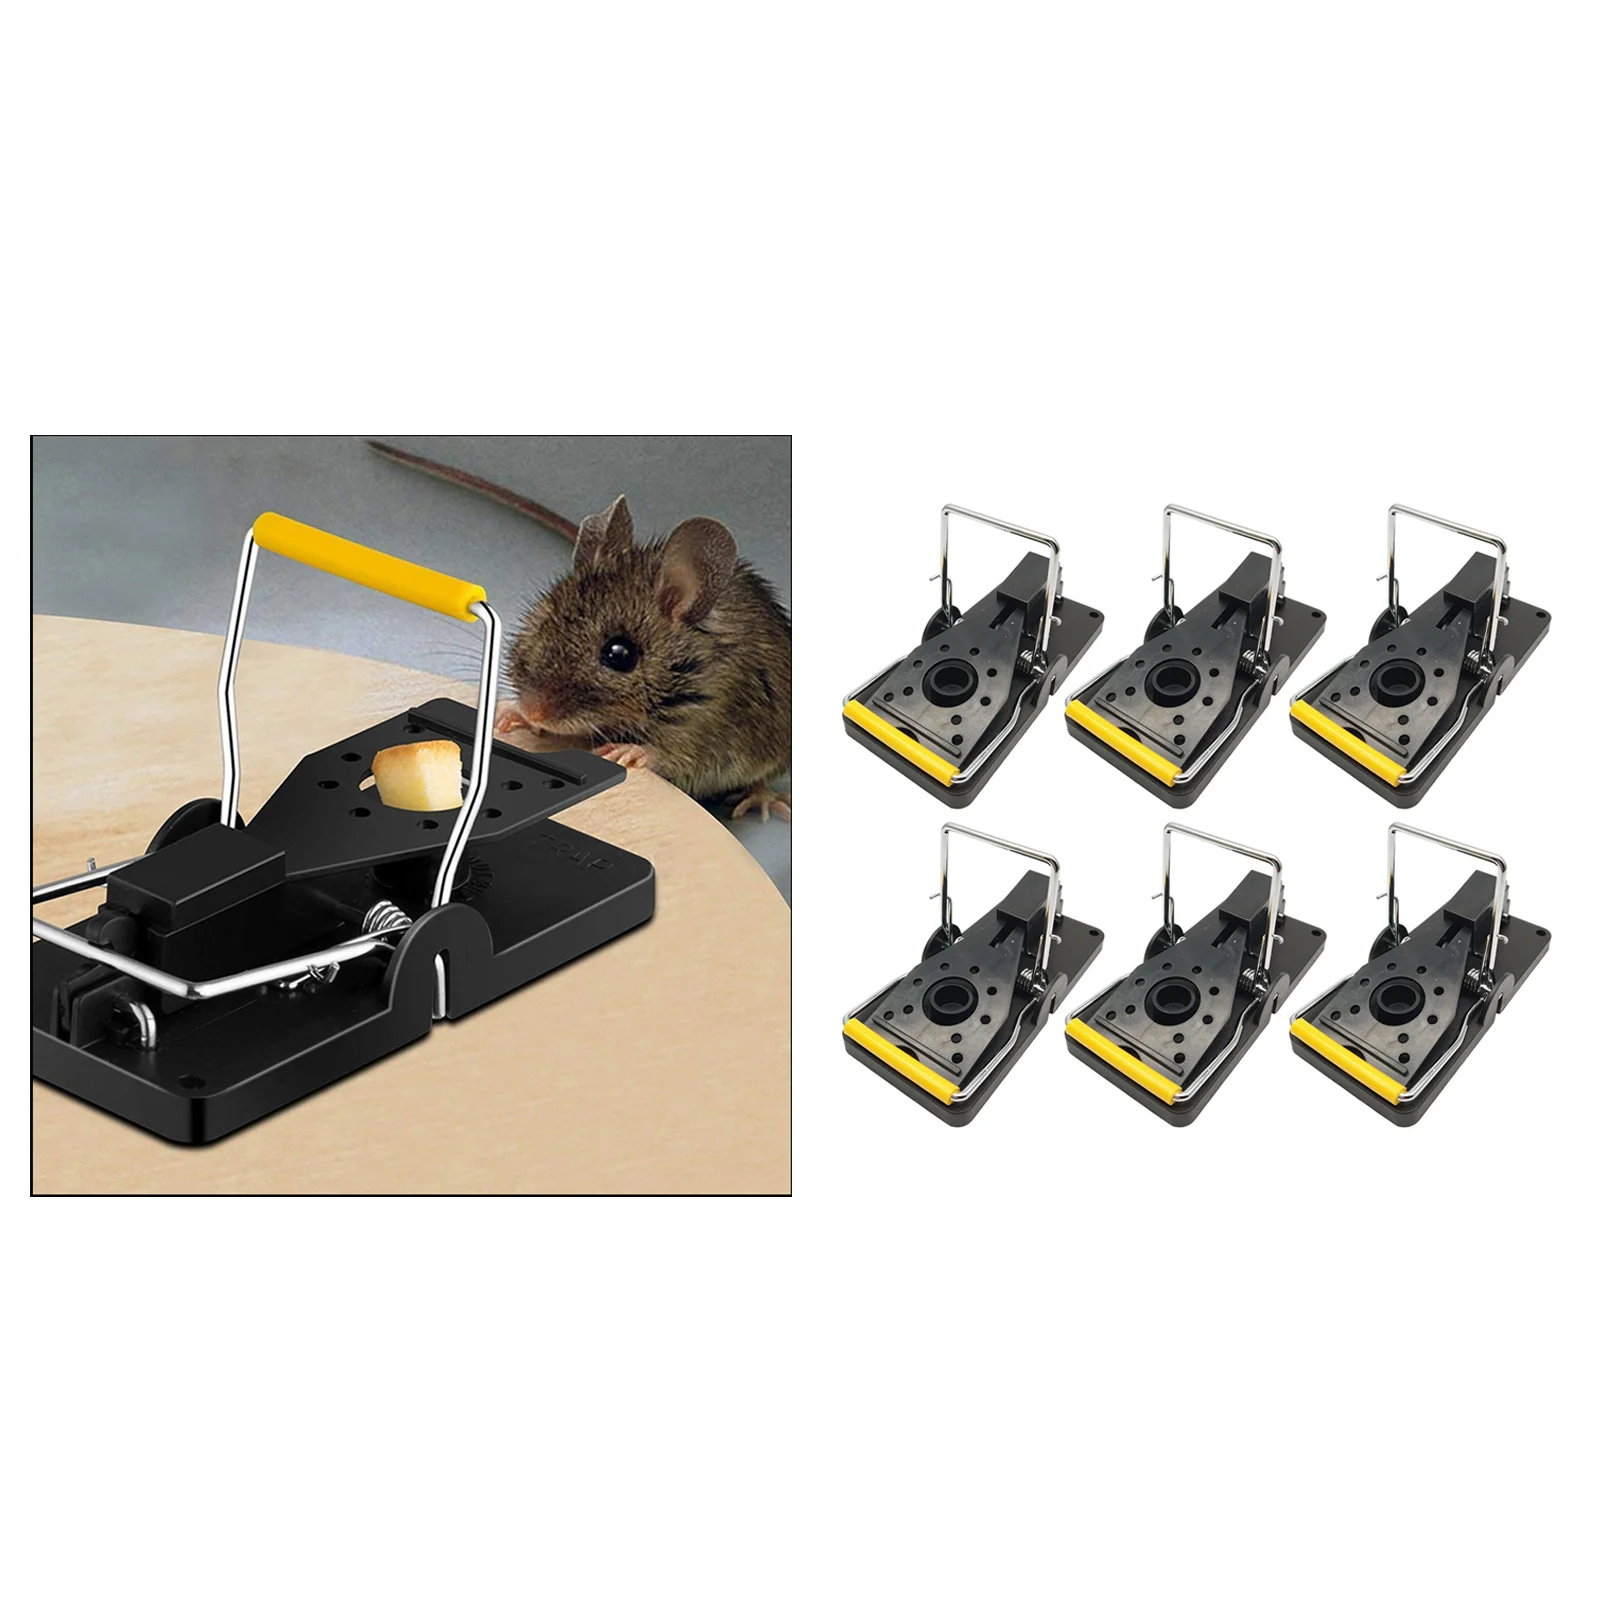 https://ae01.alicdn.com/kf/Ha84a6fe971c94b80900d8eff7b1baa22K/Set-of-6-Powerful-Mouse-Traps-for-Family-Effective-Reusable-Mousetrap-Indoor-Outdoor-Garden-Pest-Control.jpg